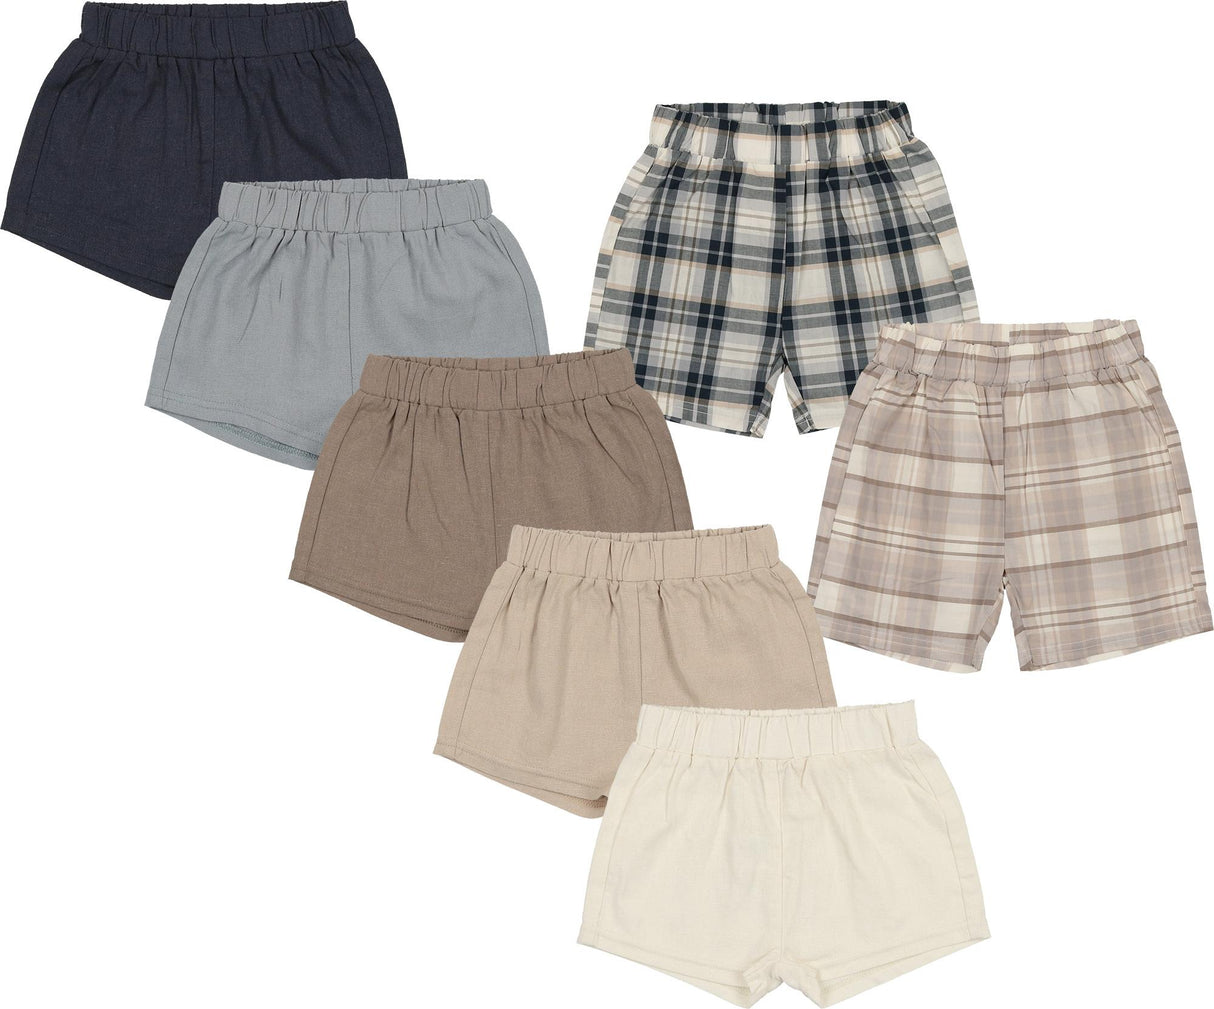 Analogie by Lil Legs Shabbos Collection Boys Linen Pull On Dress Shorts